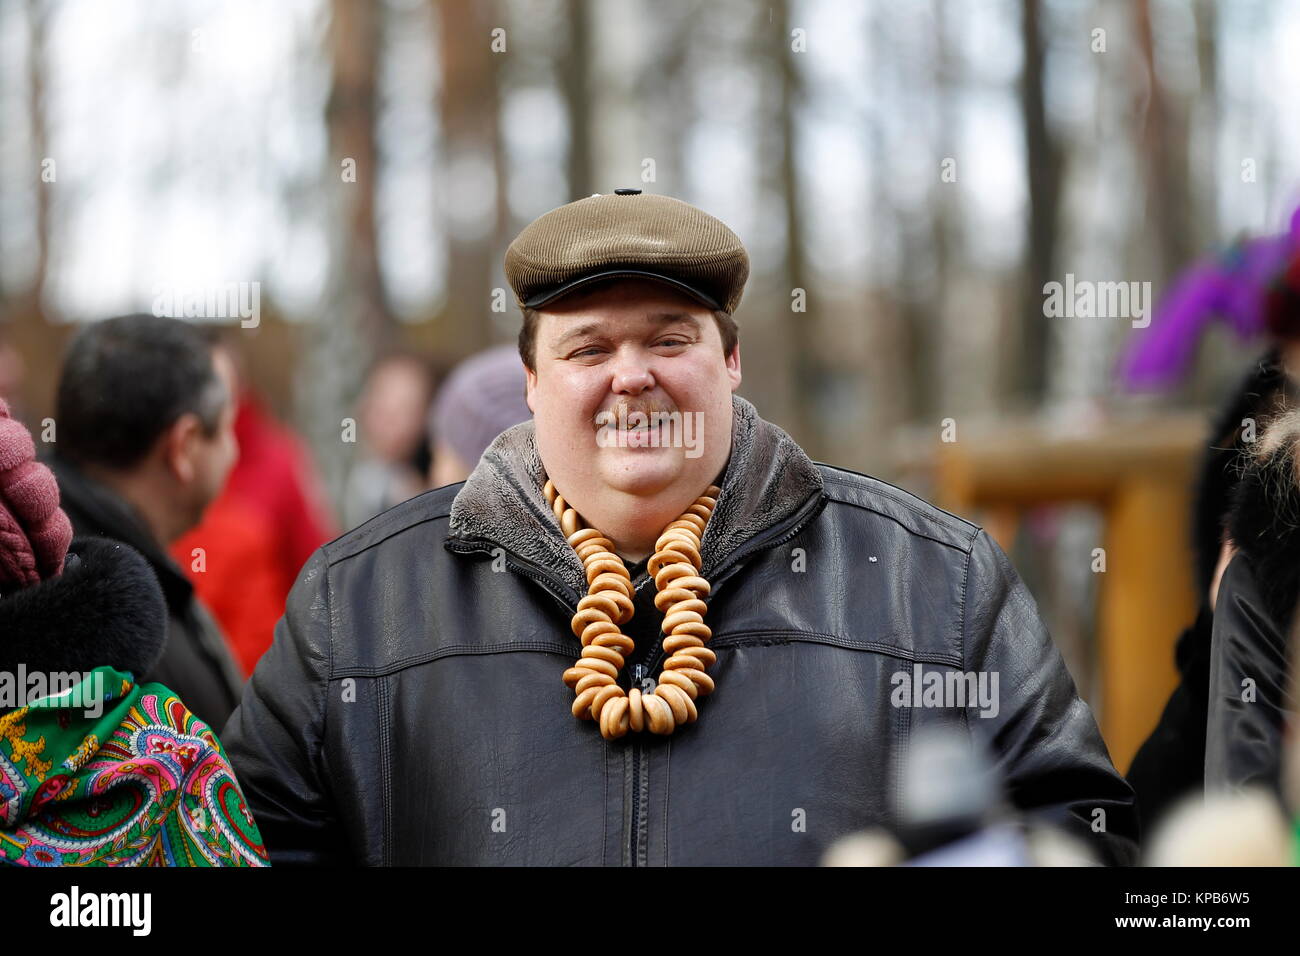 Belarus city of Gomel. The celebration of the national Russian holiday 'Farewell to winter'  festival 'Maslenitsa' 25.02.2017 year.  Complete man with Stock Photo